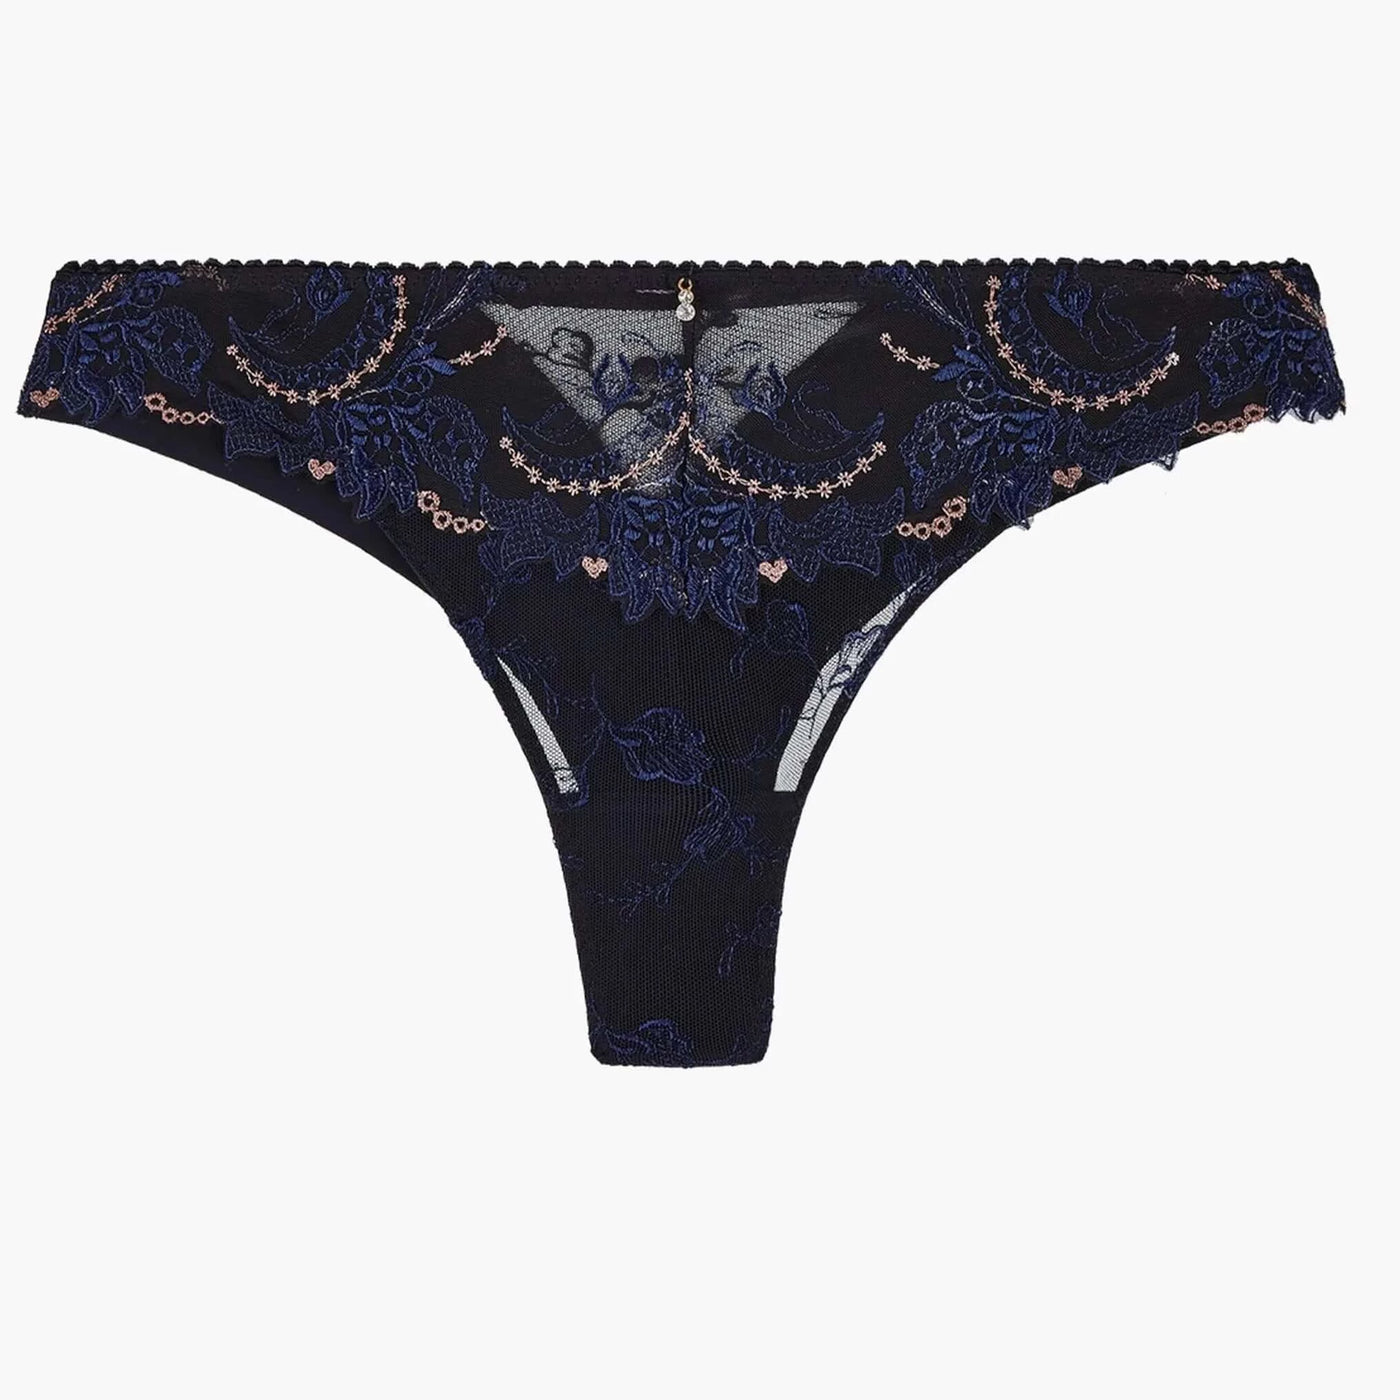 Aubade Amour Precieux Tanga in Cosmic Blue UD26-Panties-Aubade-Cosmic Blue-XSmall-Anna Bella Fine Lingerie, Reveal Your Most Gorgeous Self!